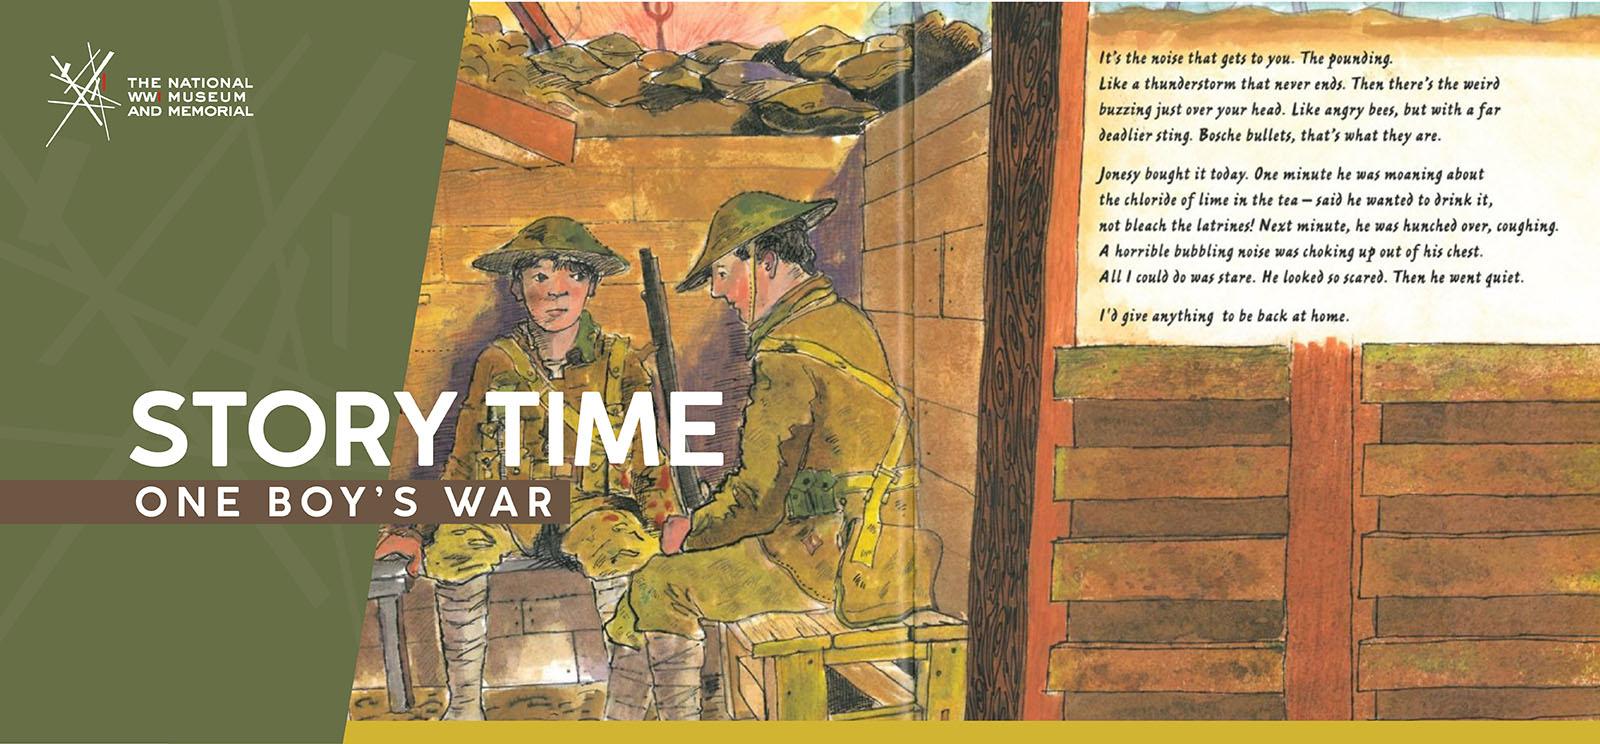 Image: painted illustration from a children's book depicting two very young men in WWI military uniform sitting in a trench looking worried. Text: 'Story Time / One Boy's War'